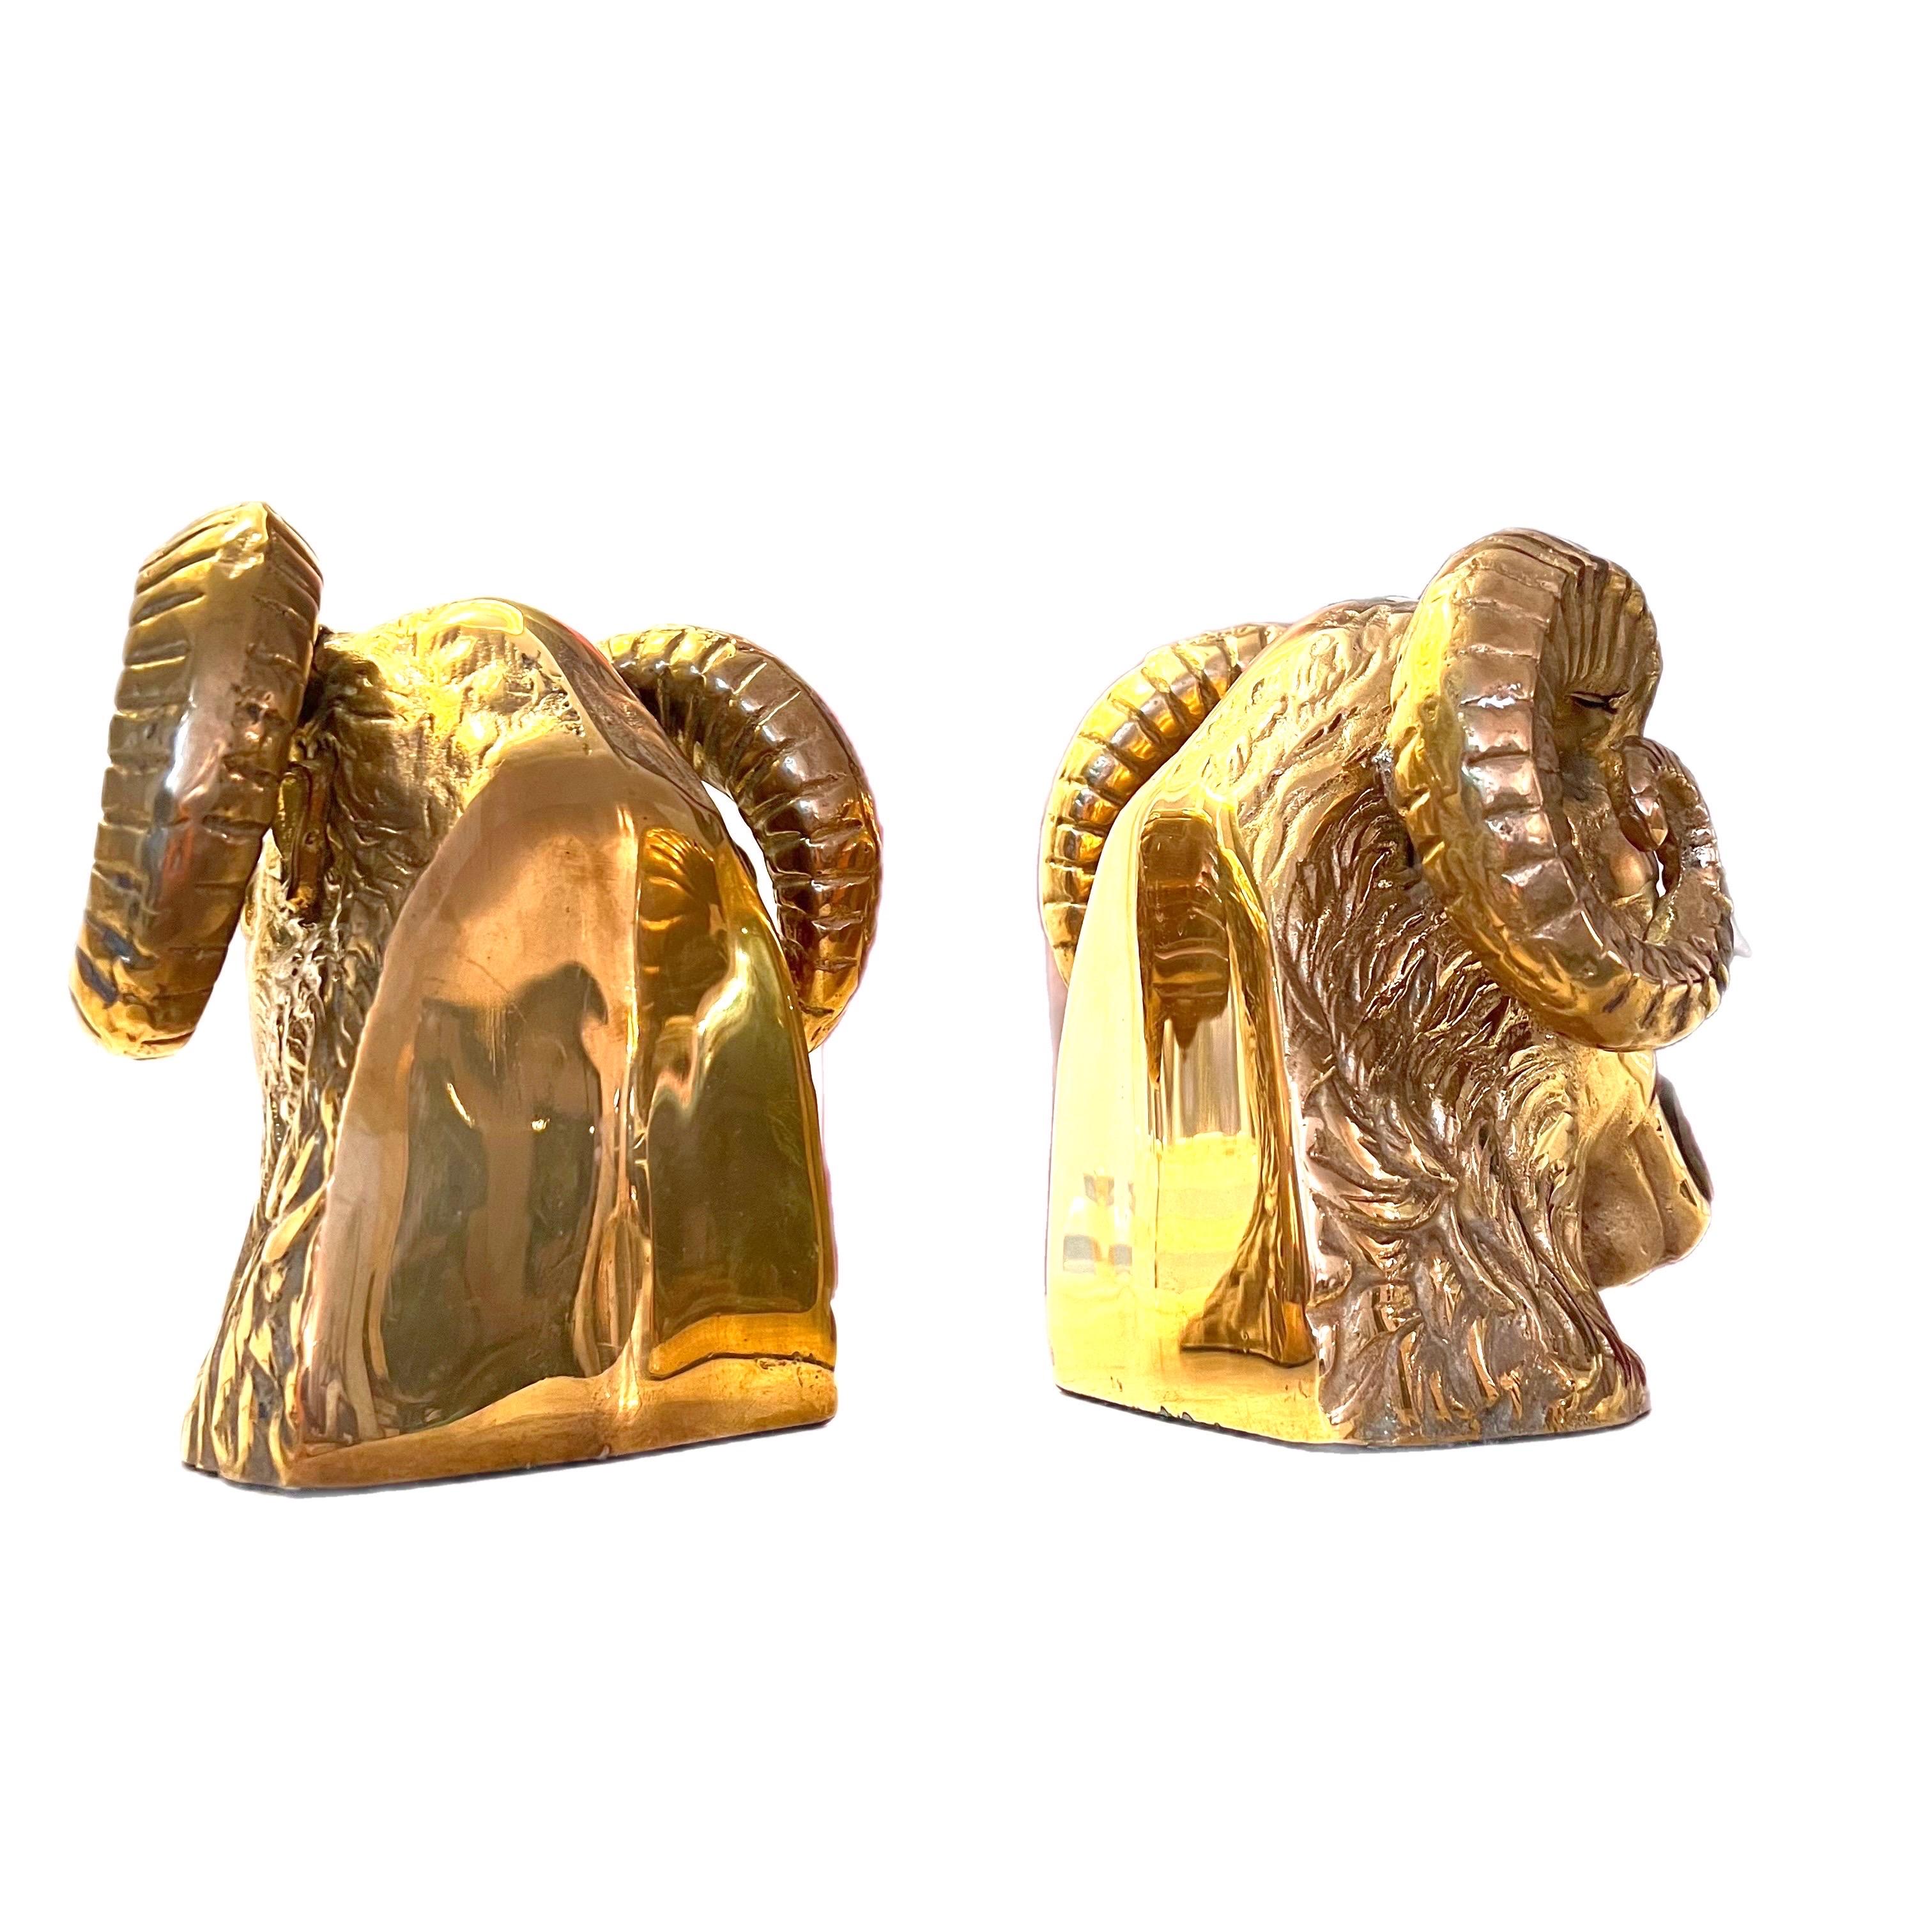 Neoclassical Vintage Brass Big Horn Ram Bookends, a Pair For Sale